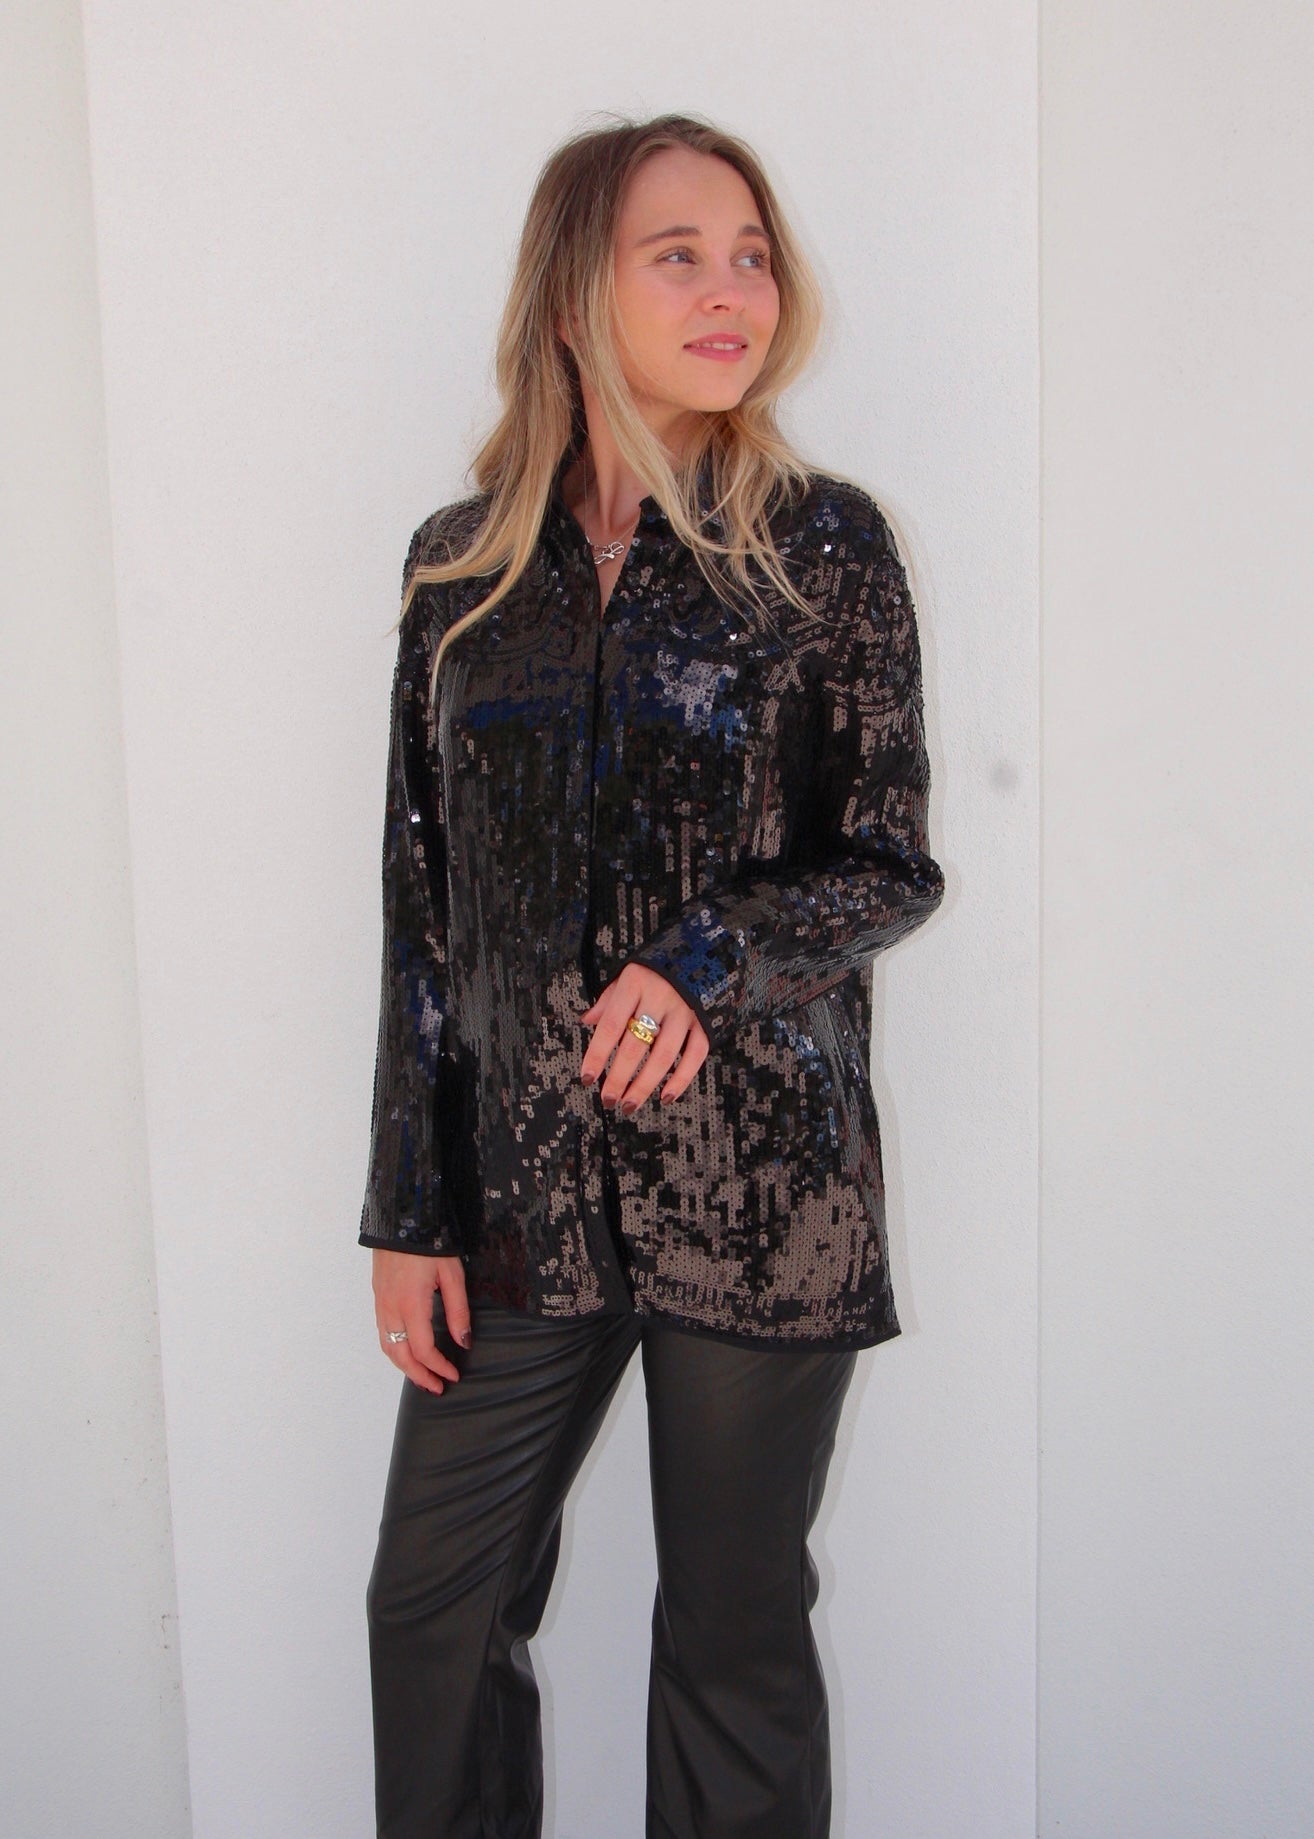 NYE at the Ritz: Black Sequin Button Down Shirt